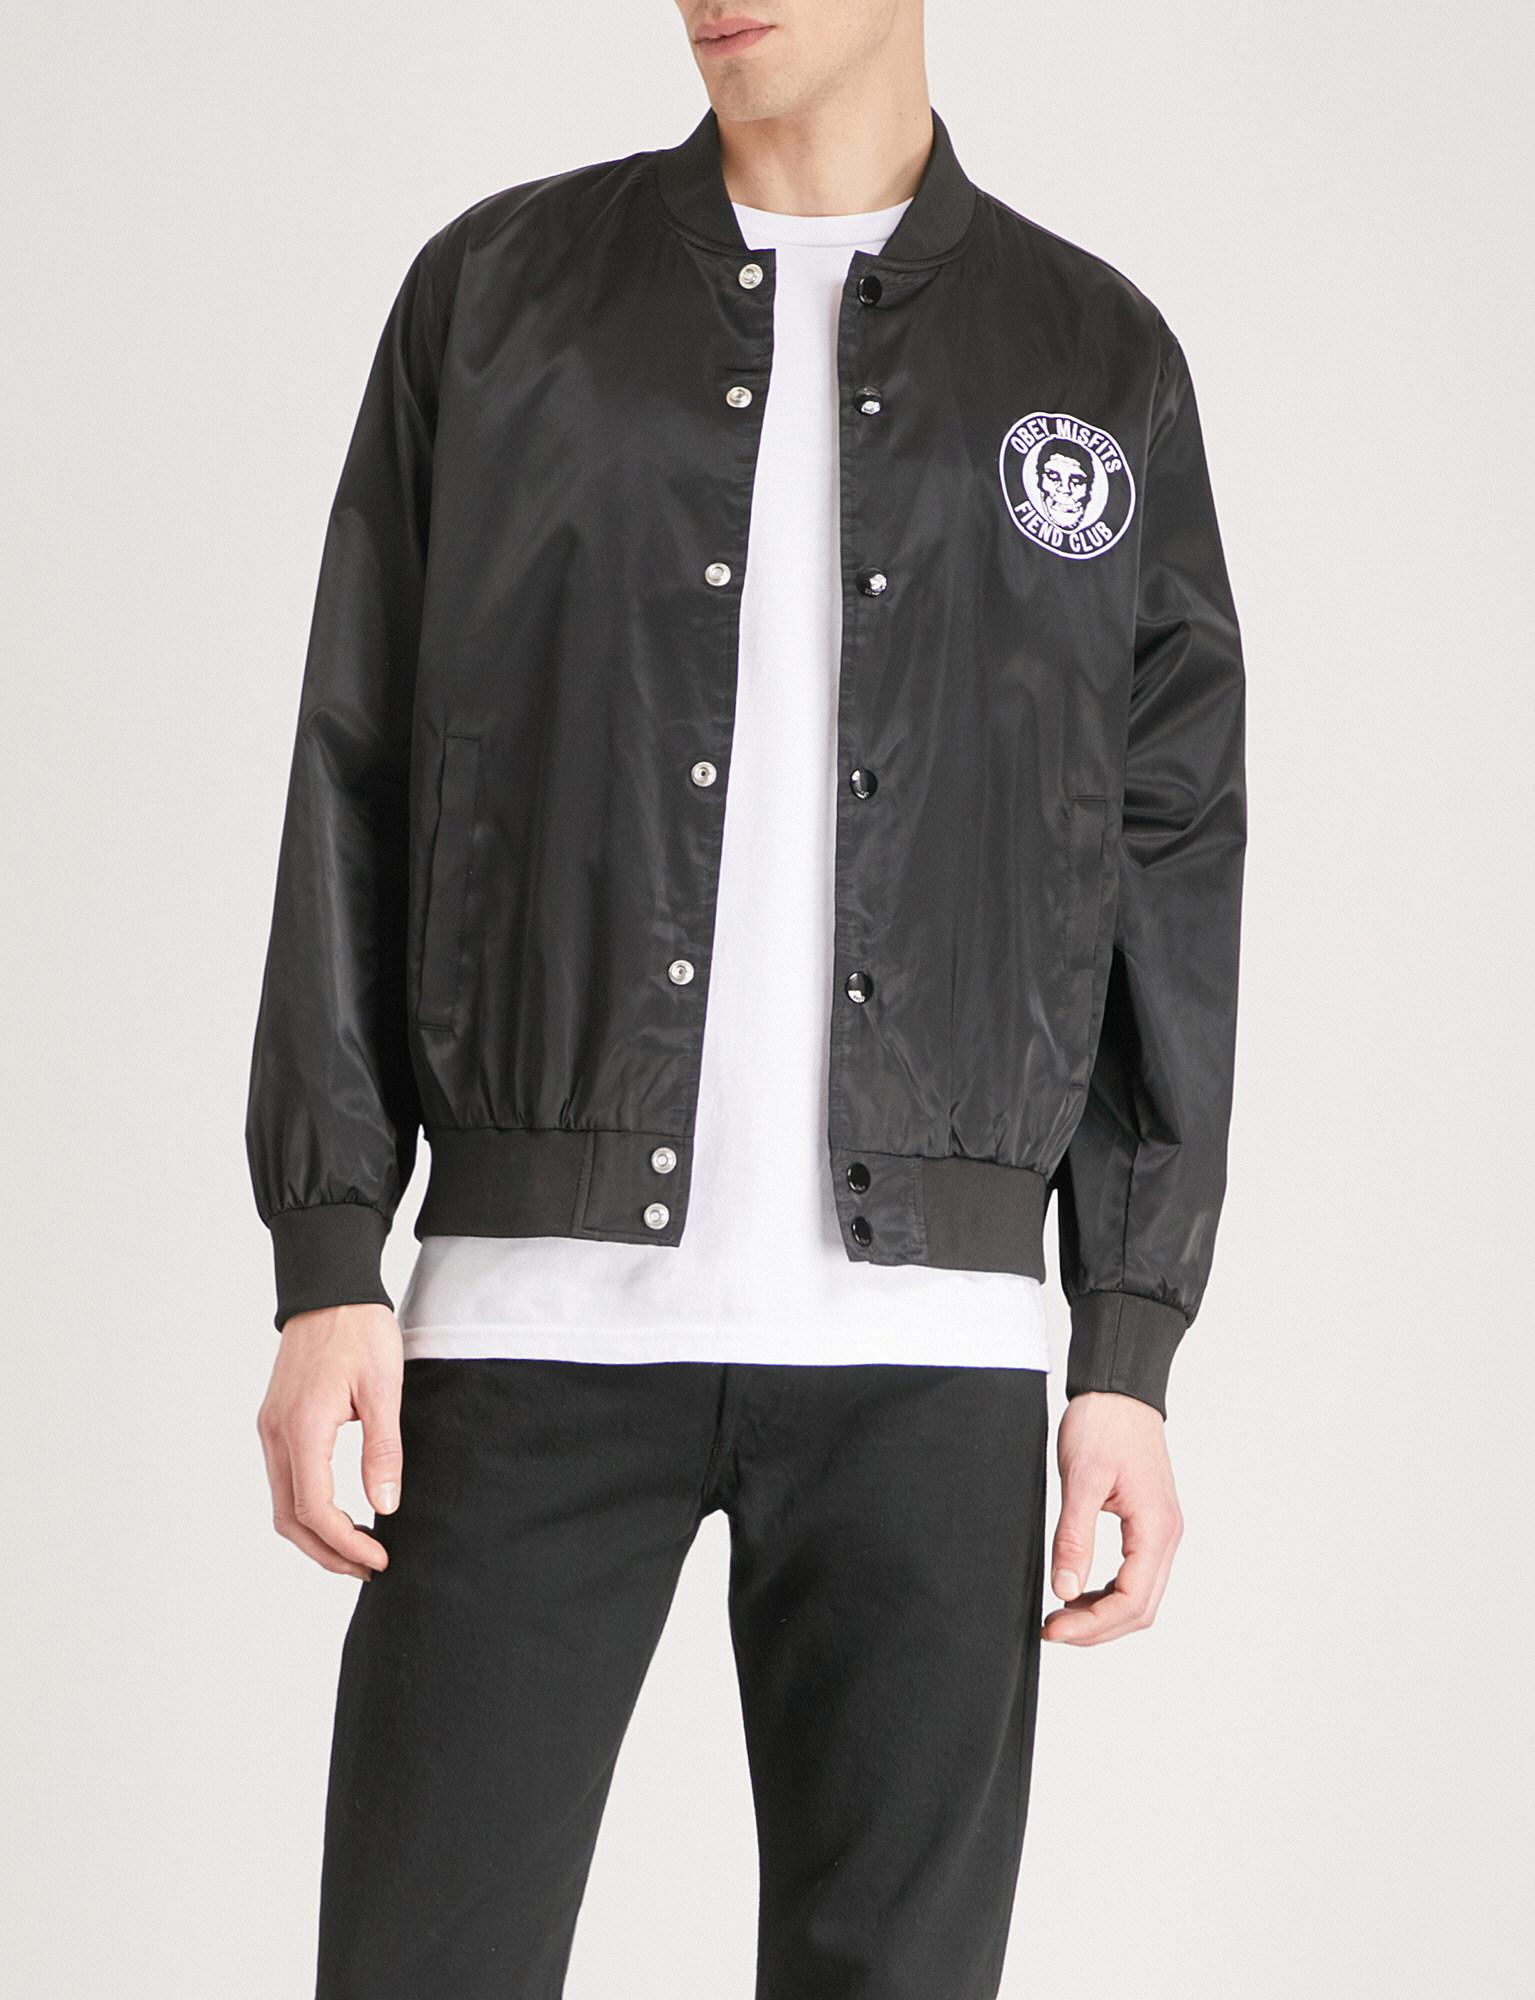 Obey X Misfits Fiend Club Patch Satin-shell Jacket in Black for Men | Lyst